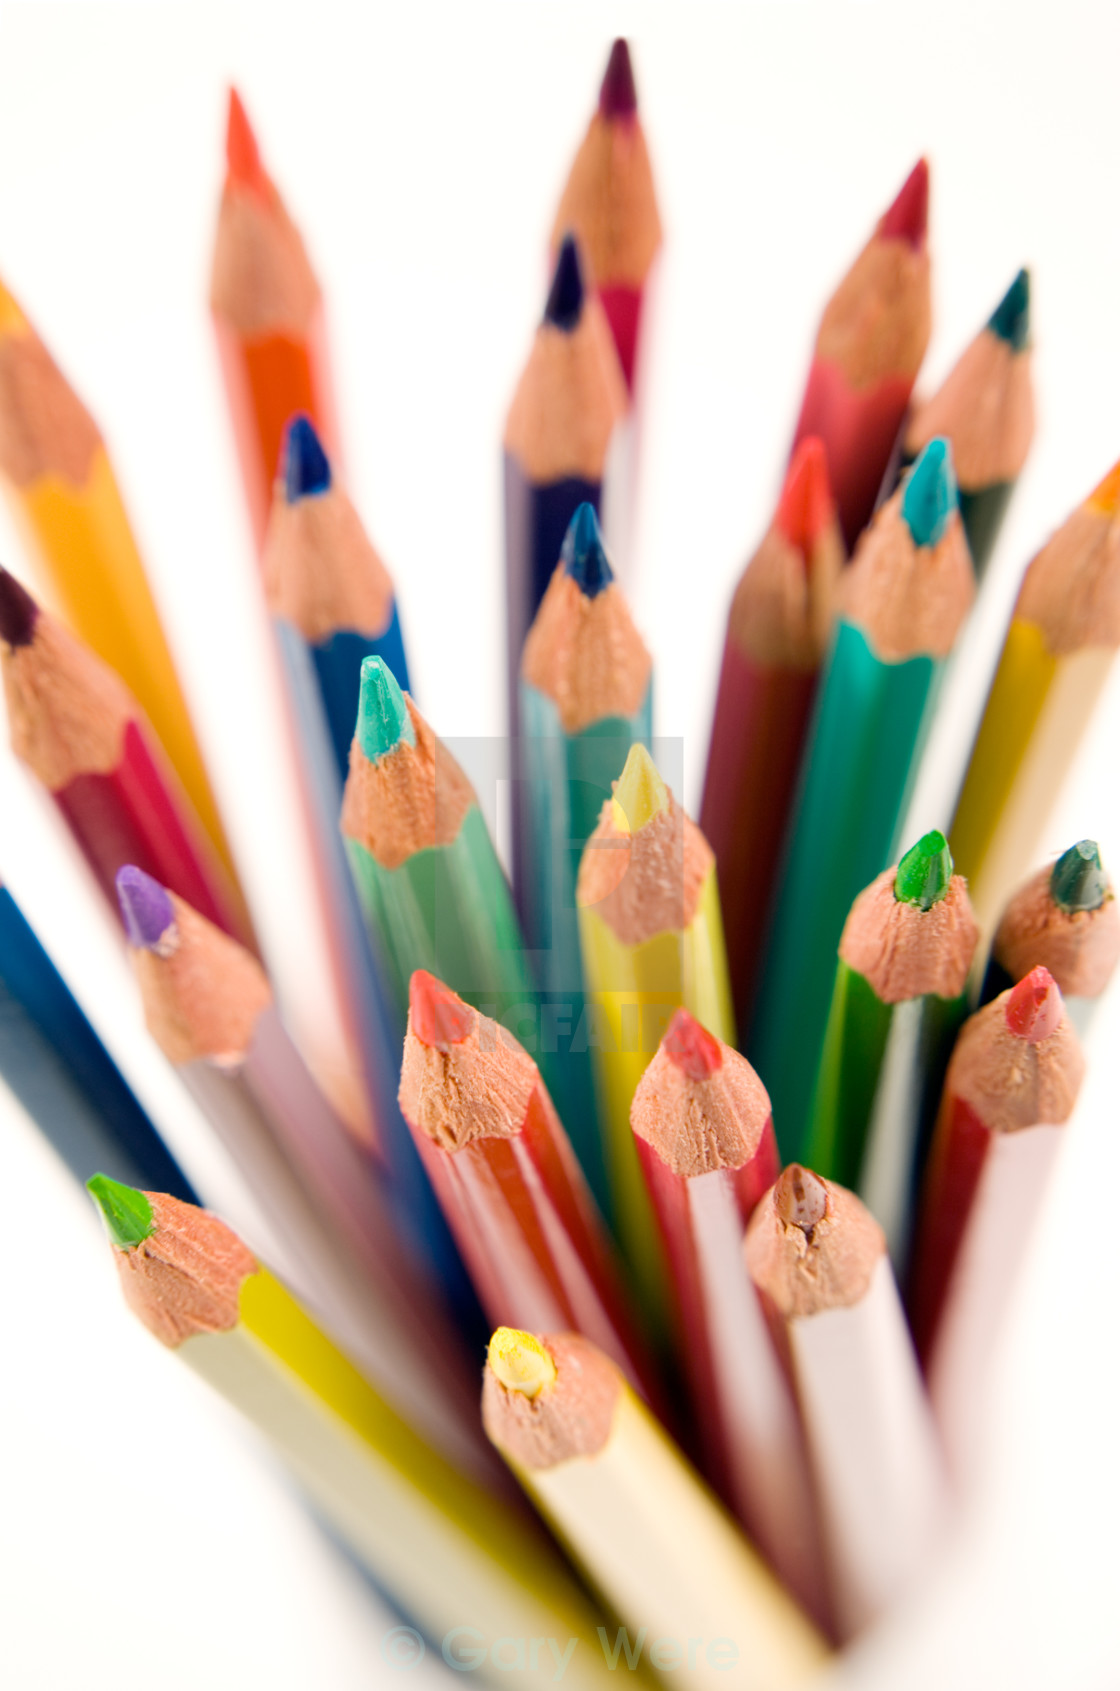 "Coloured Pencil Points-3" stock image